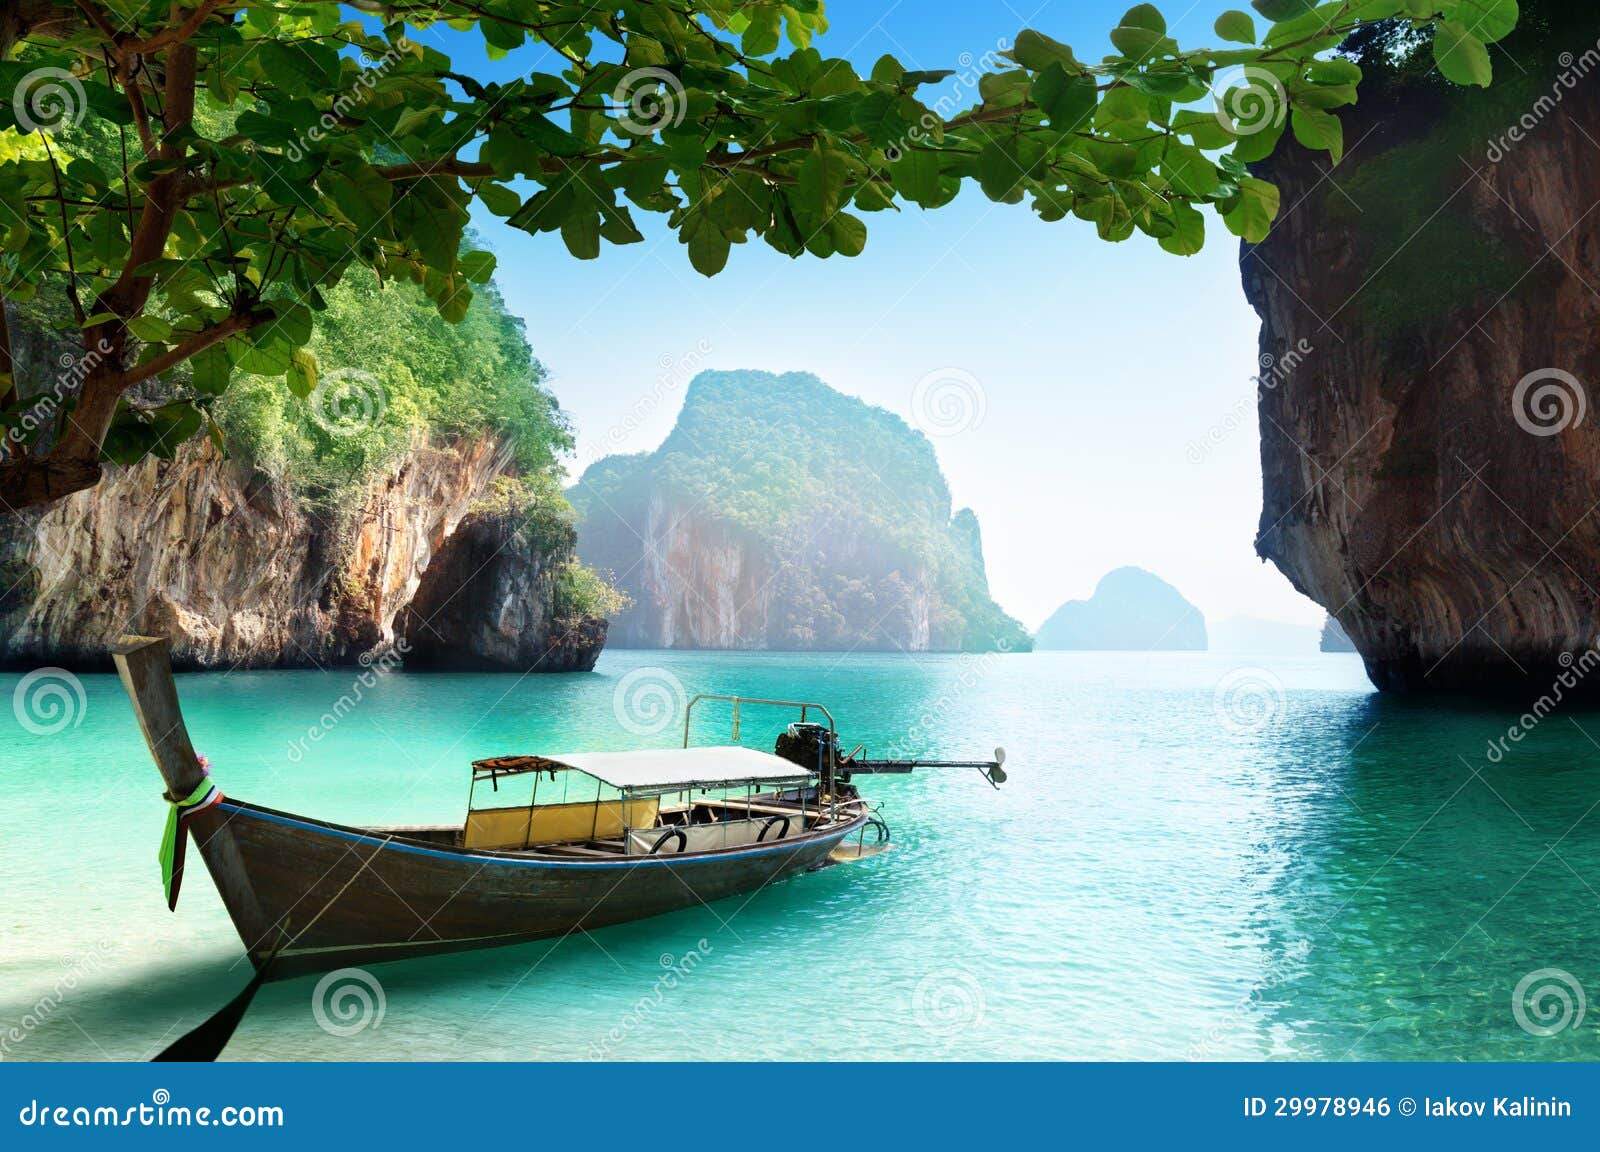 boat on small island in thailand royalty free stock image